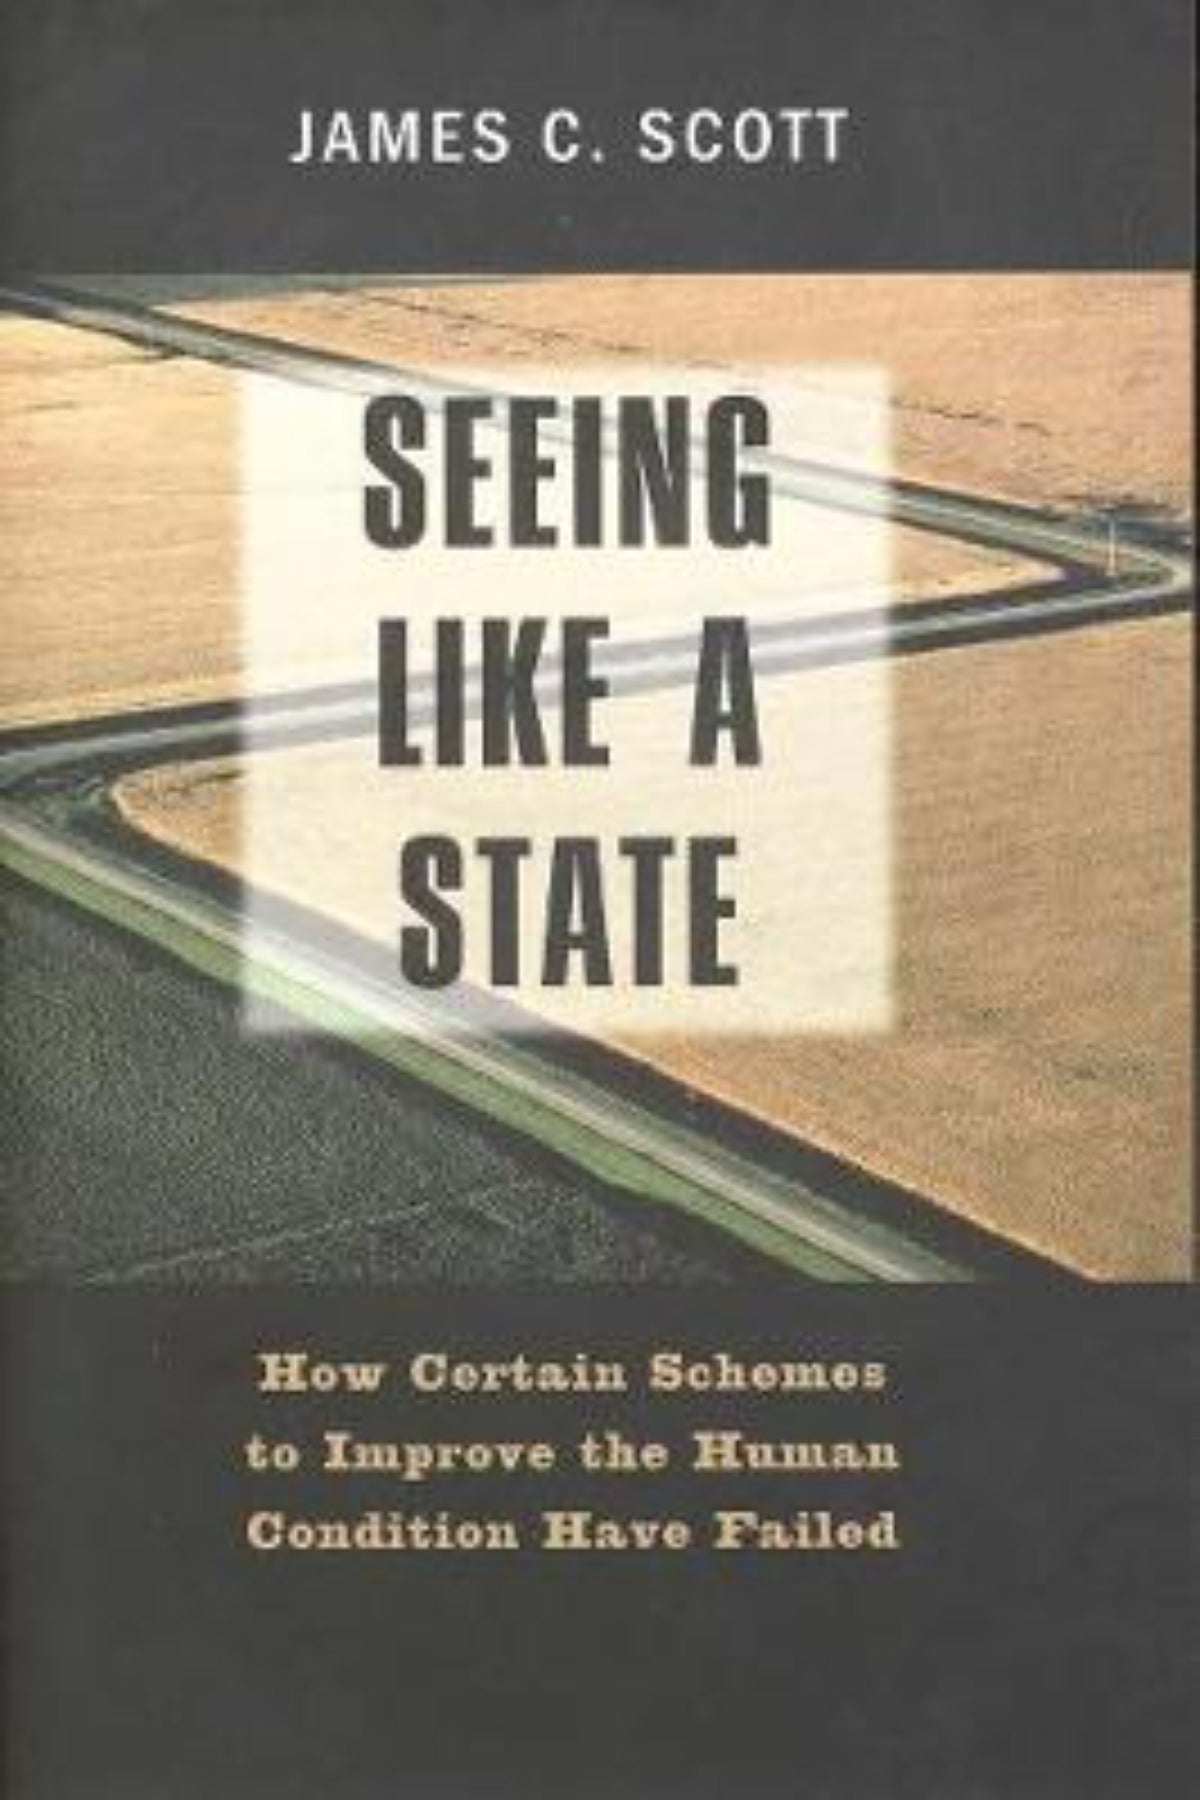 Seeing Like a State: How Certain Schemes to Improve the Human Condition Have Failed